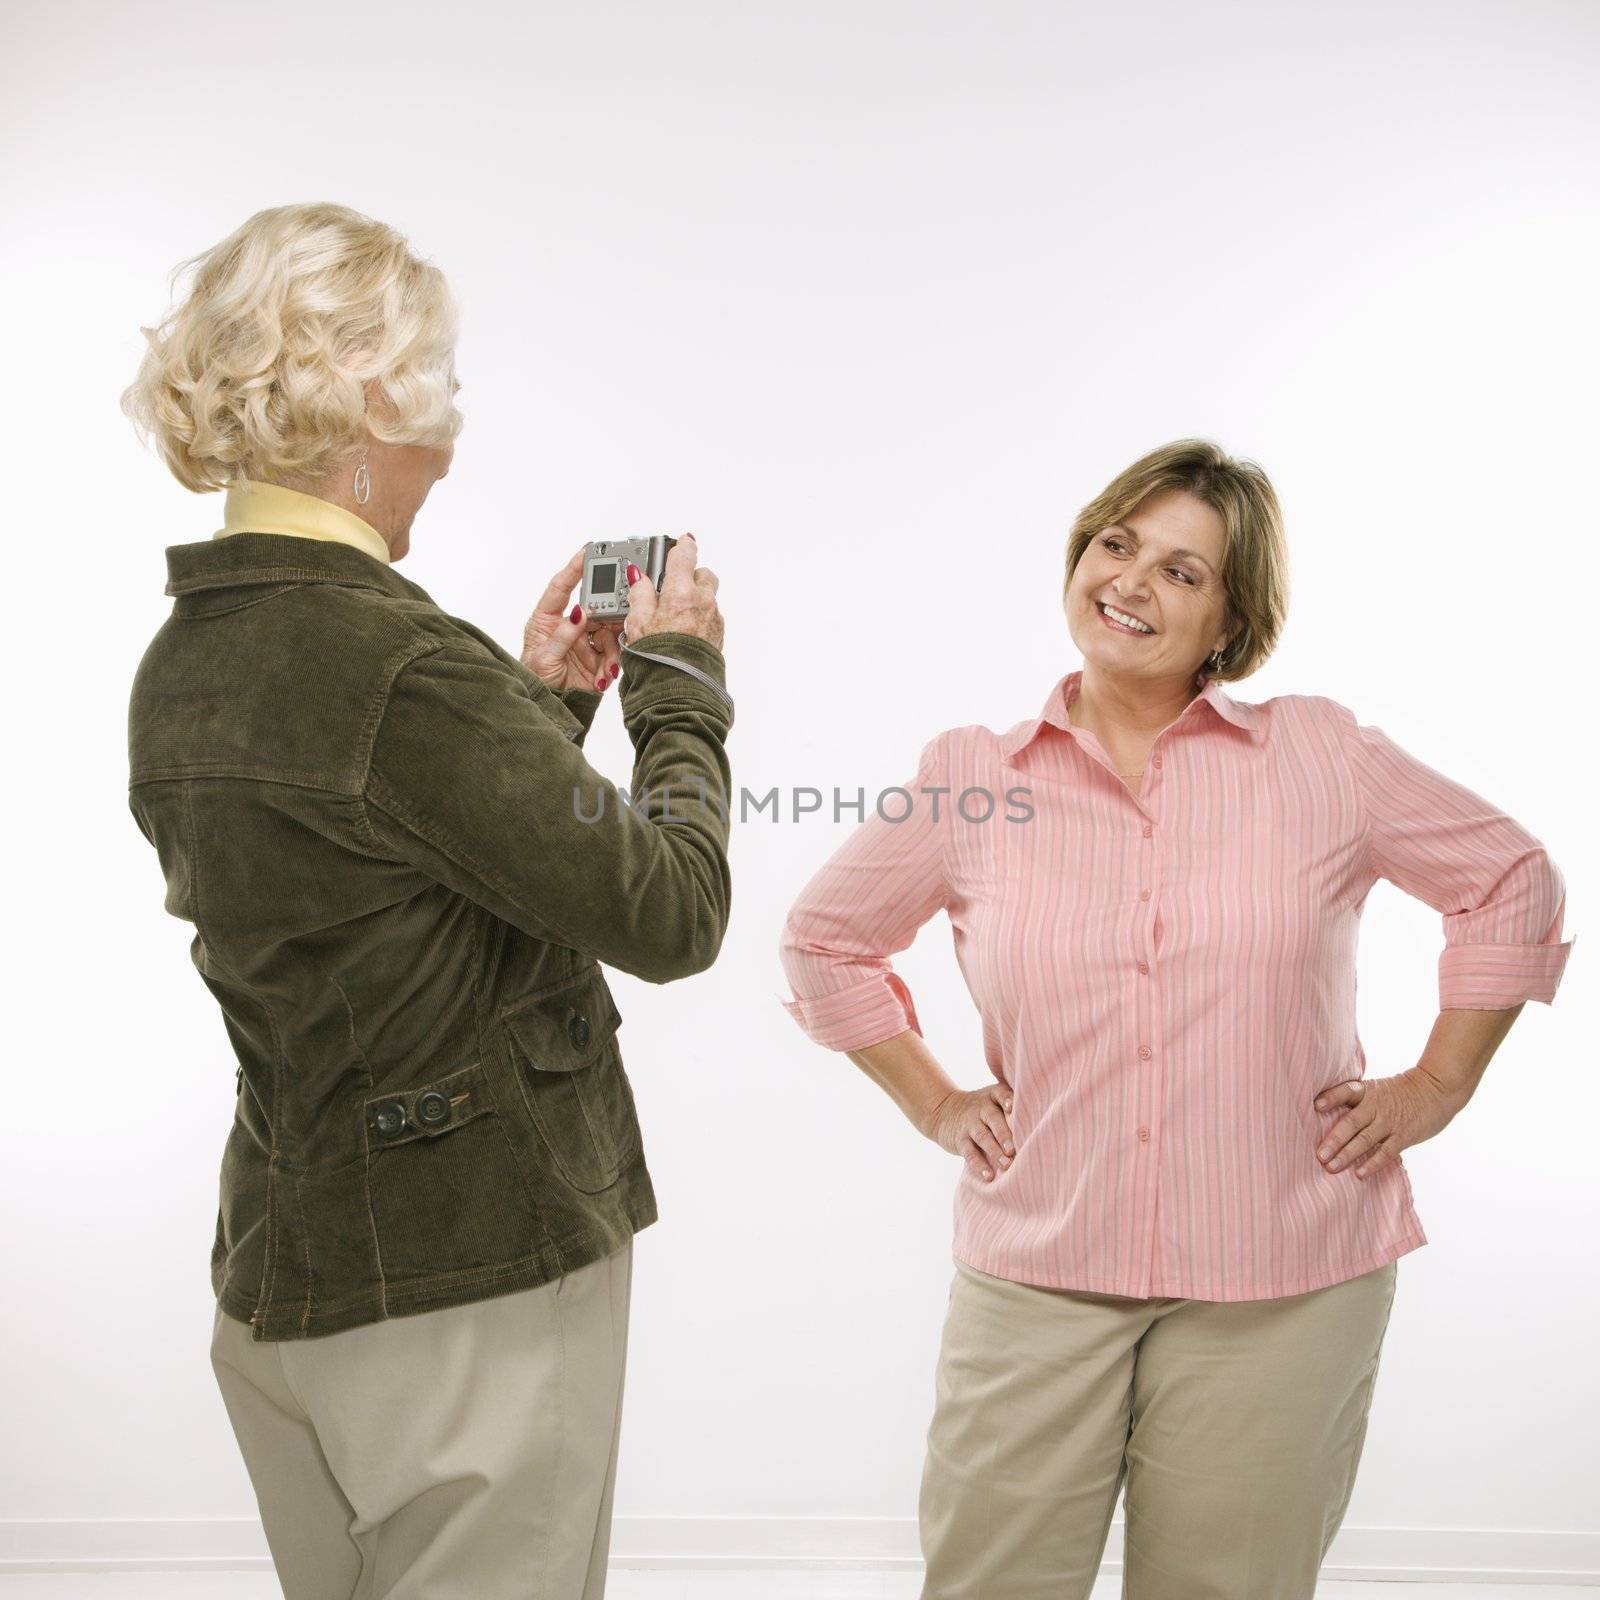 Caucasian senior woman taking photo with digital camera of middle aged woman.